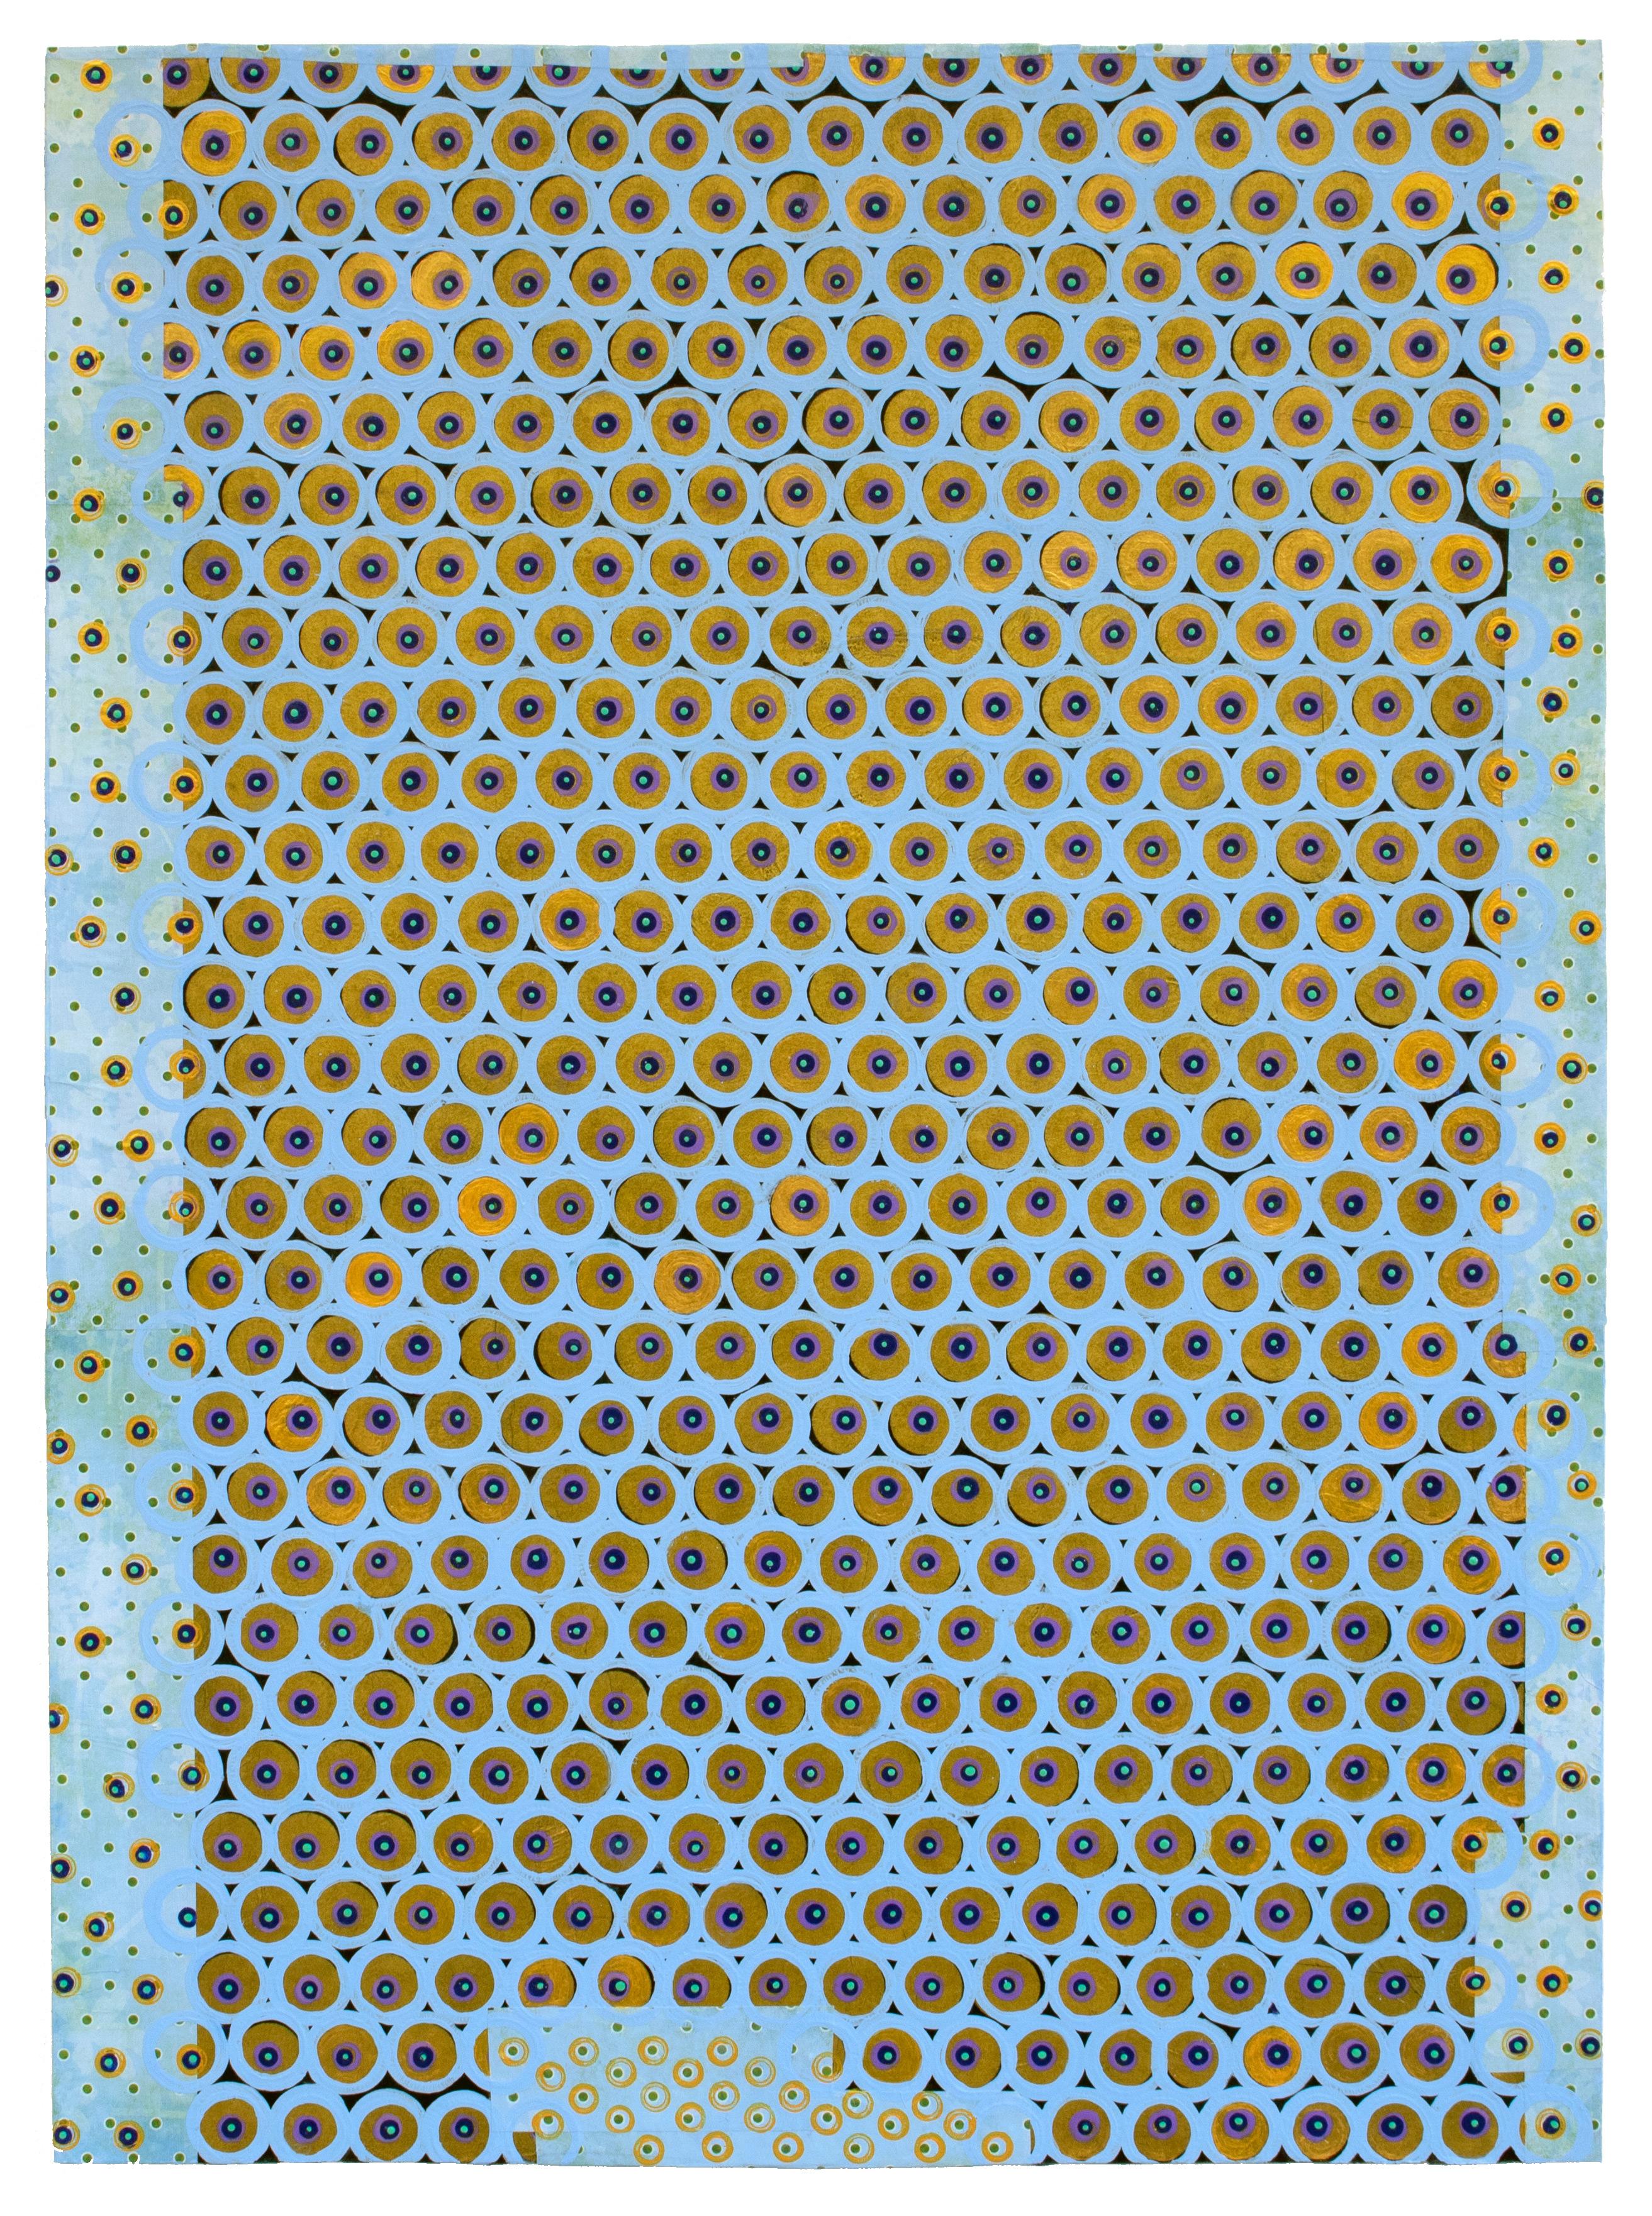 Diane Ayott
U Want Talk, U Call, 2020
mixed media on paper
30 x 22 in.
framed size: 26 x 33.5 in.
(ay101)

Diane Ayott's work is more about color and pattern than color and form, but the Boston-based artist is working her circles, dots and lines